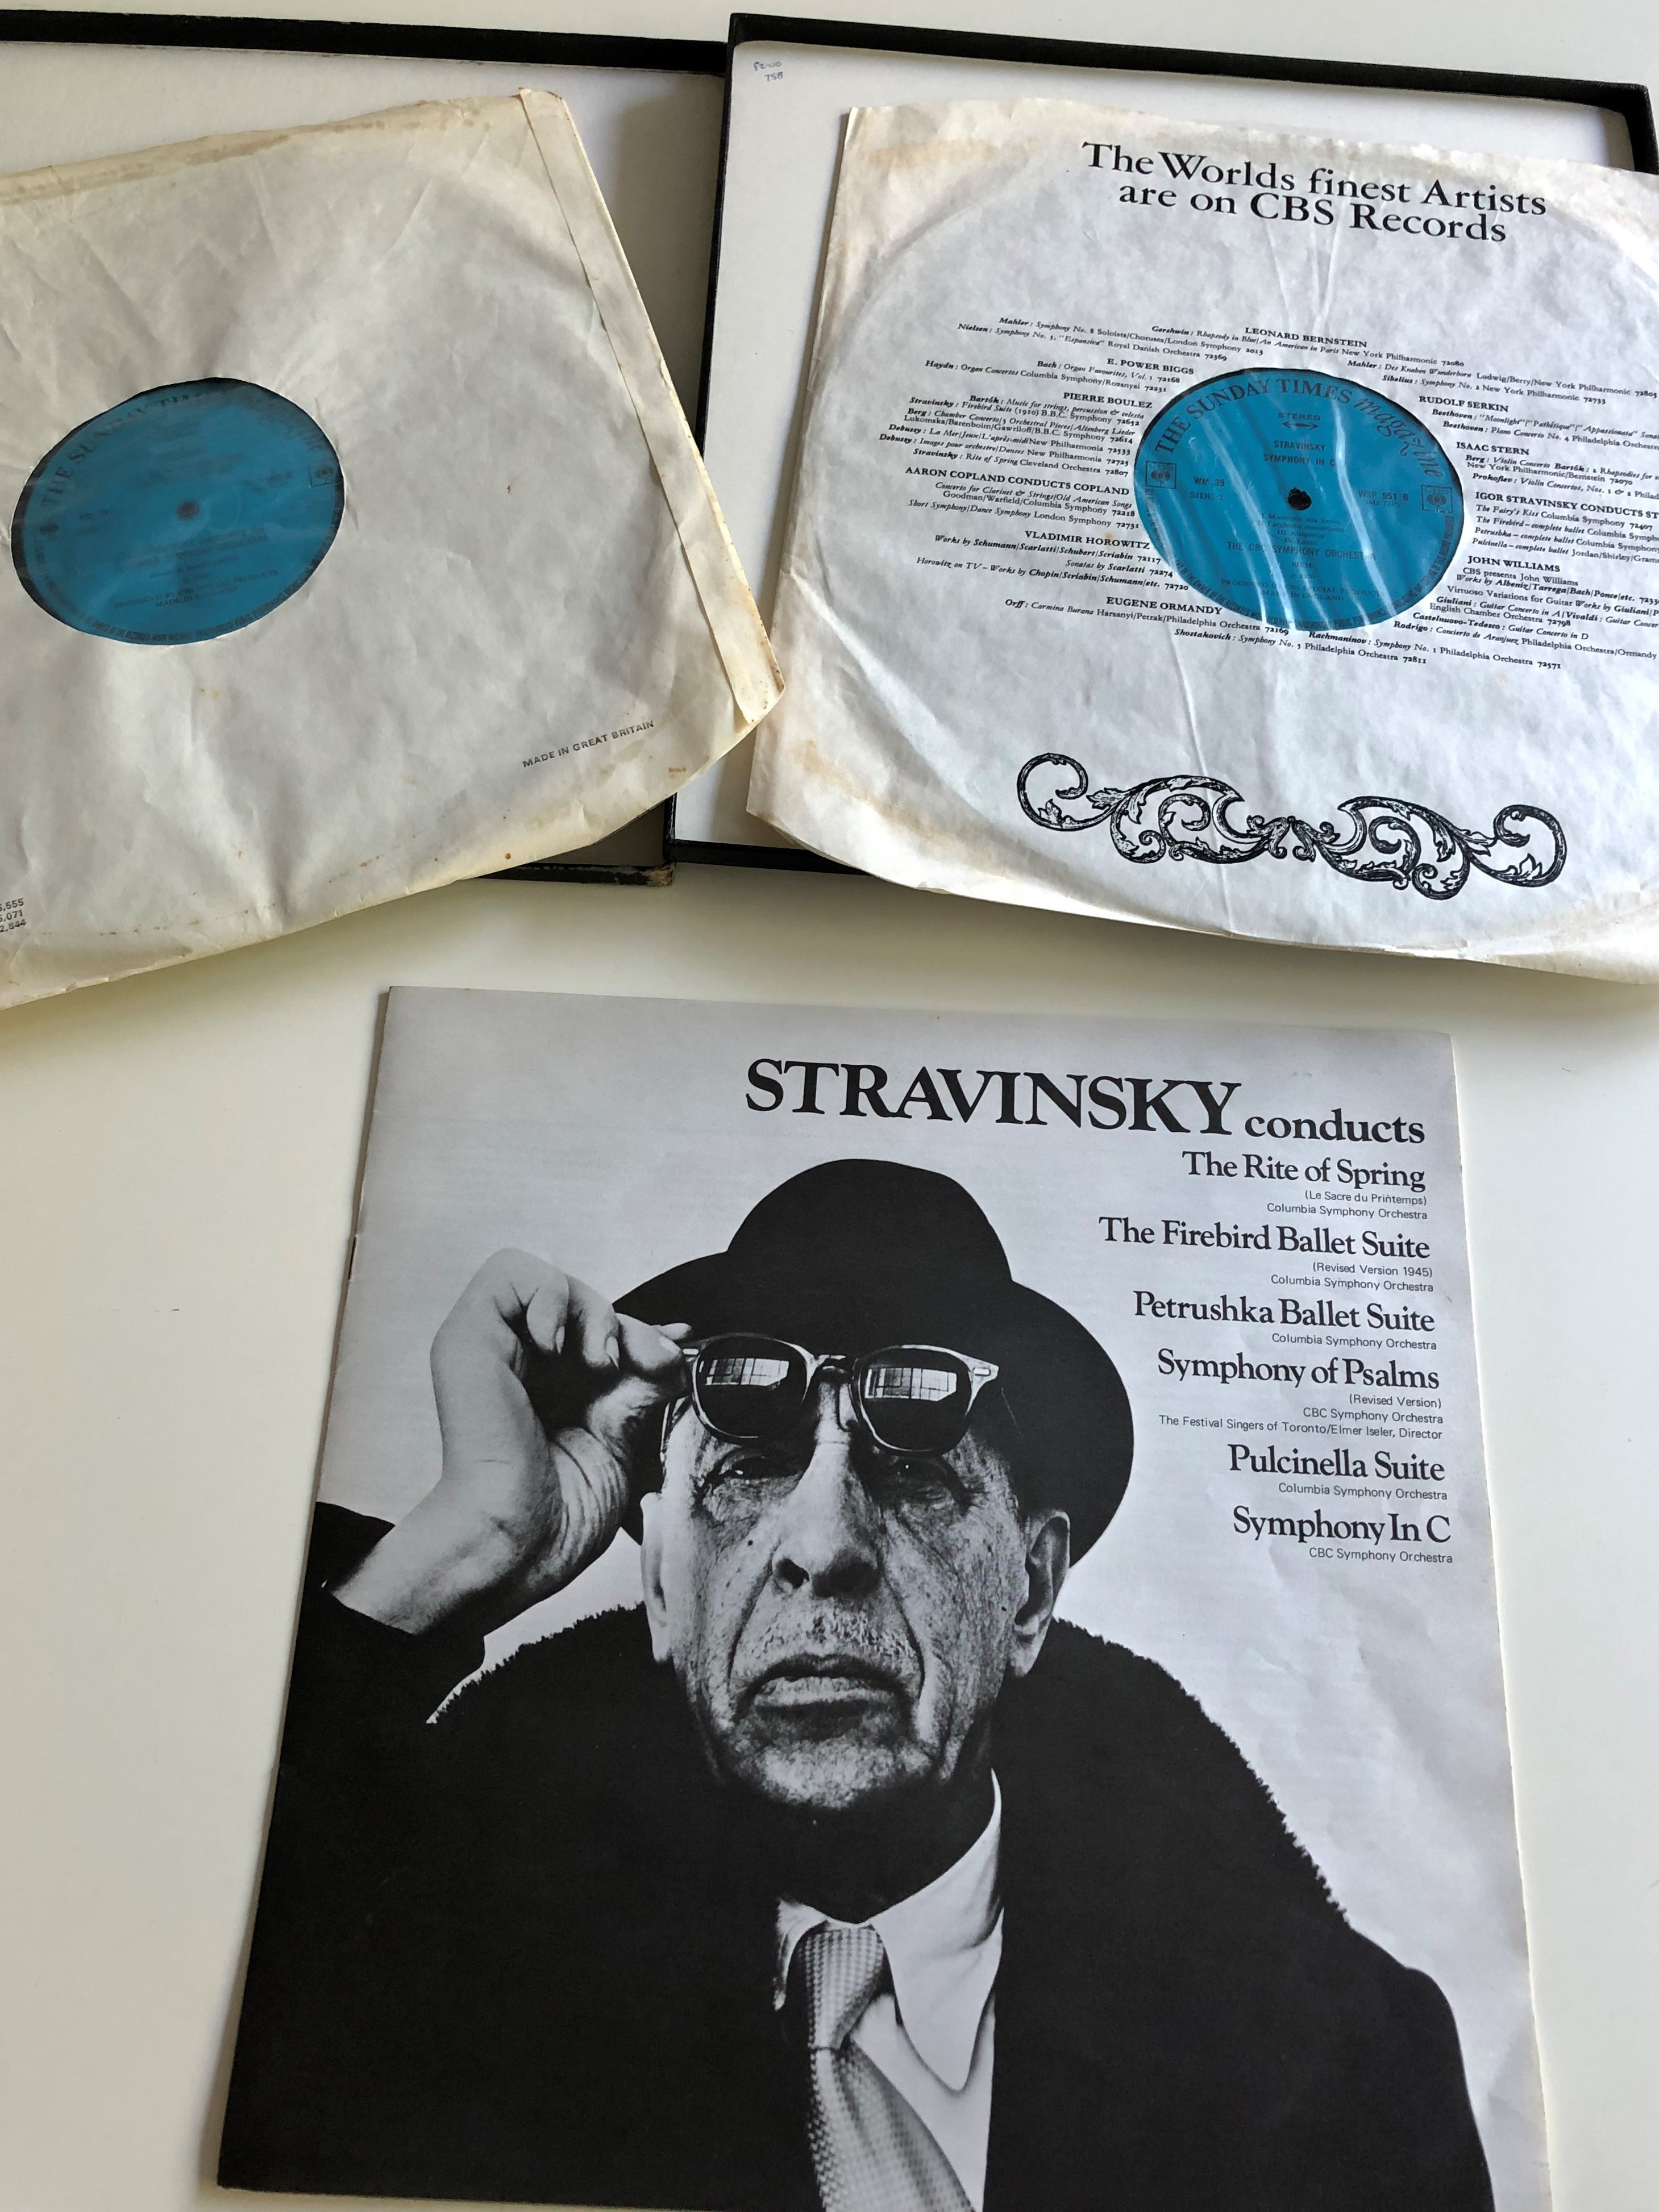 stravinsky-conducts-columbia-symphony-orchestra-cbc-symphony-orchestra-the-festival-singers-of-toronto-cbs-2x-lp-wm-39-2-.jpg